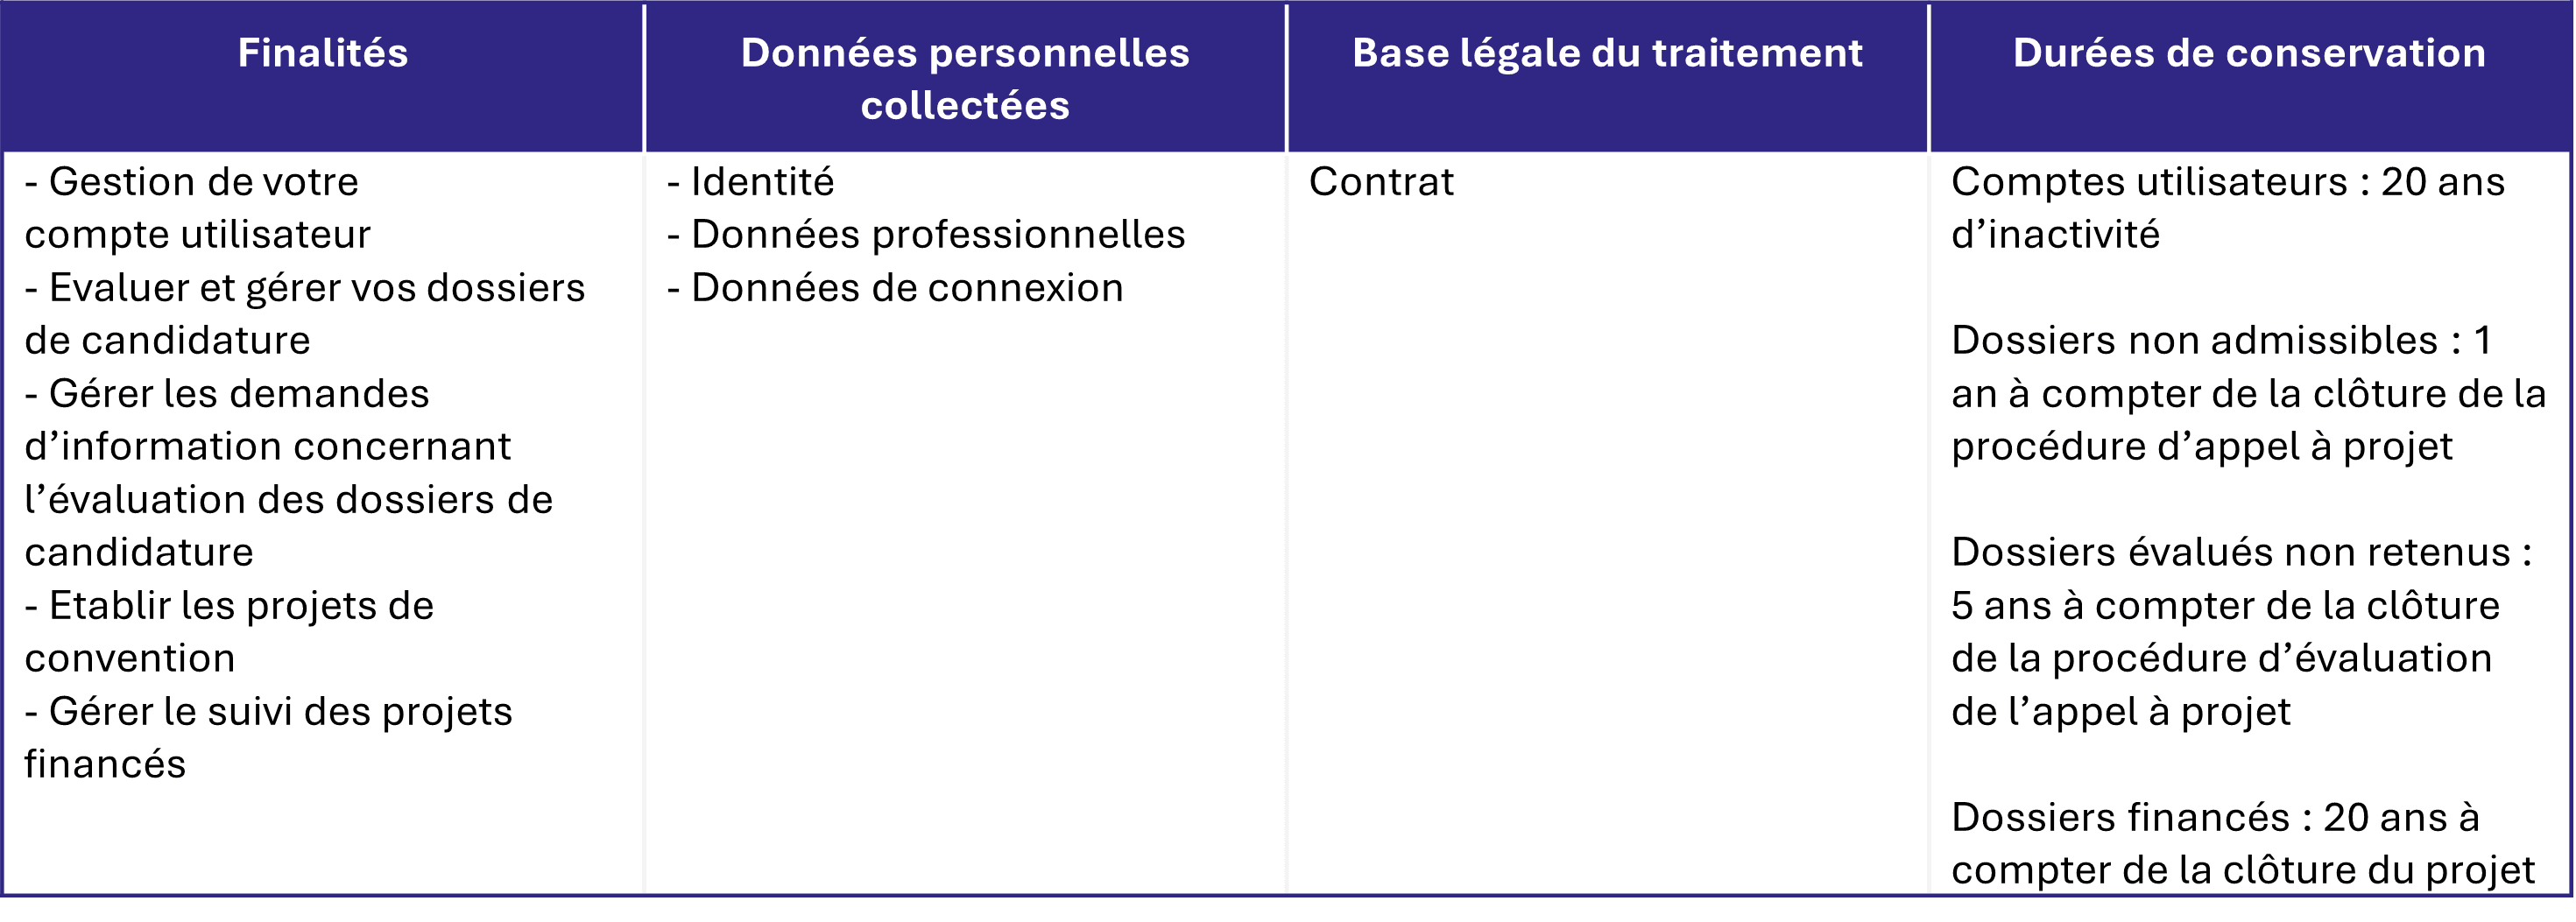 traitement-donnees-plateforme-synto.png